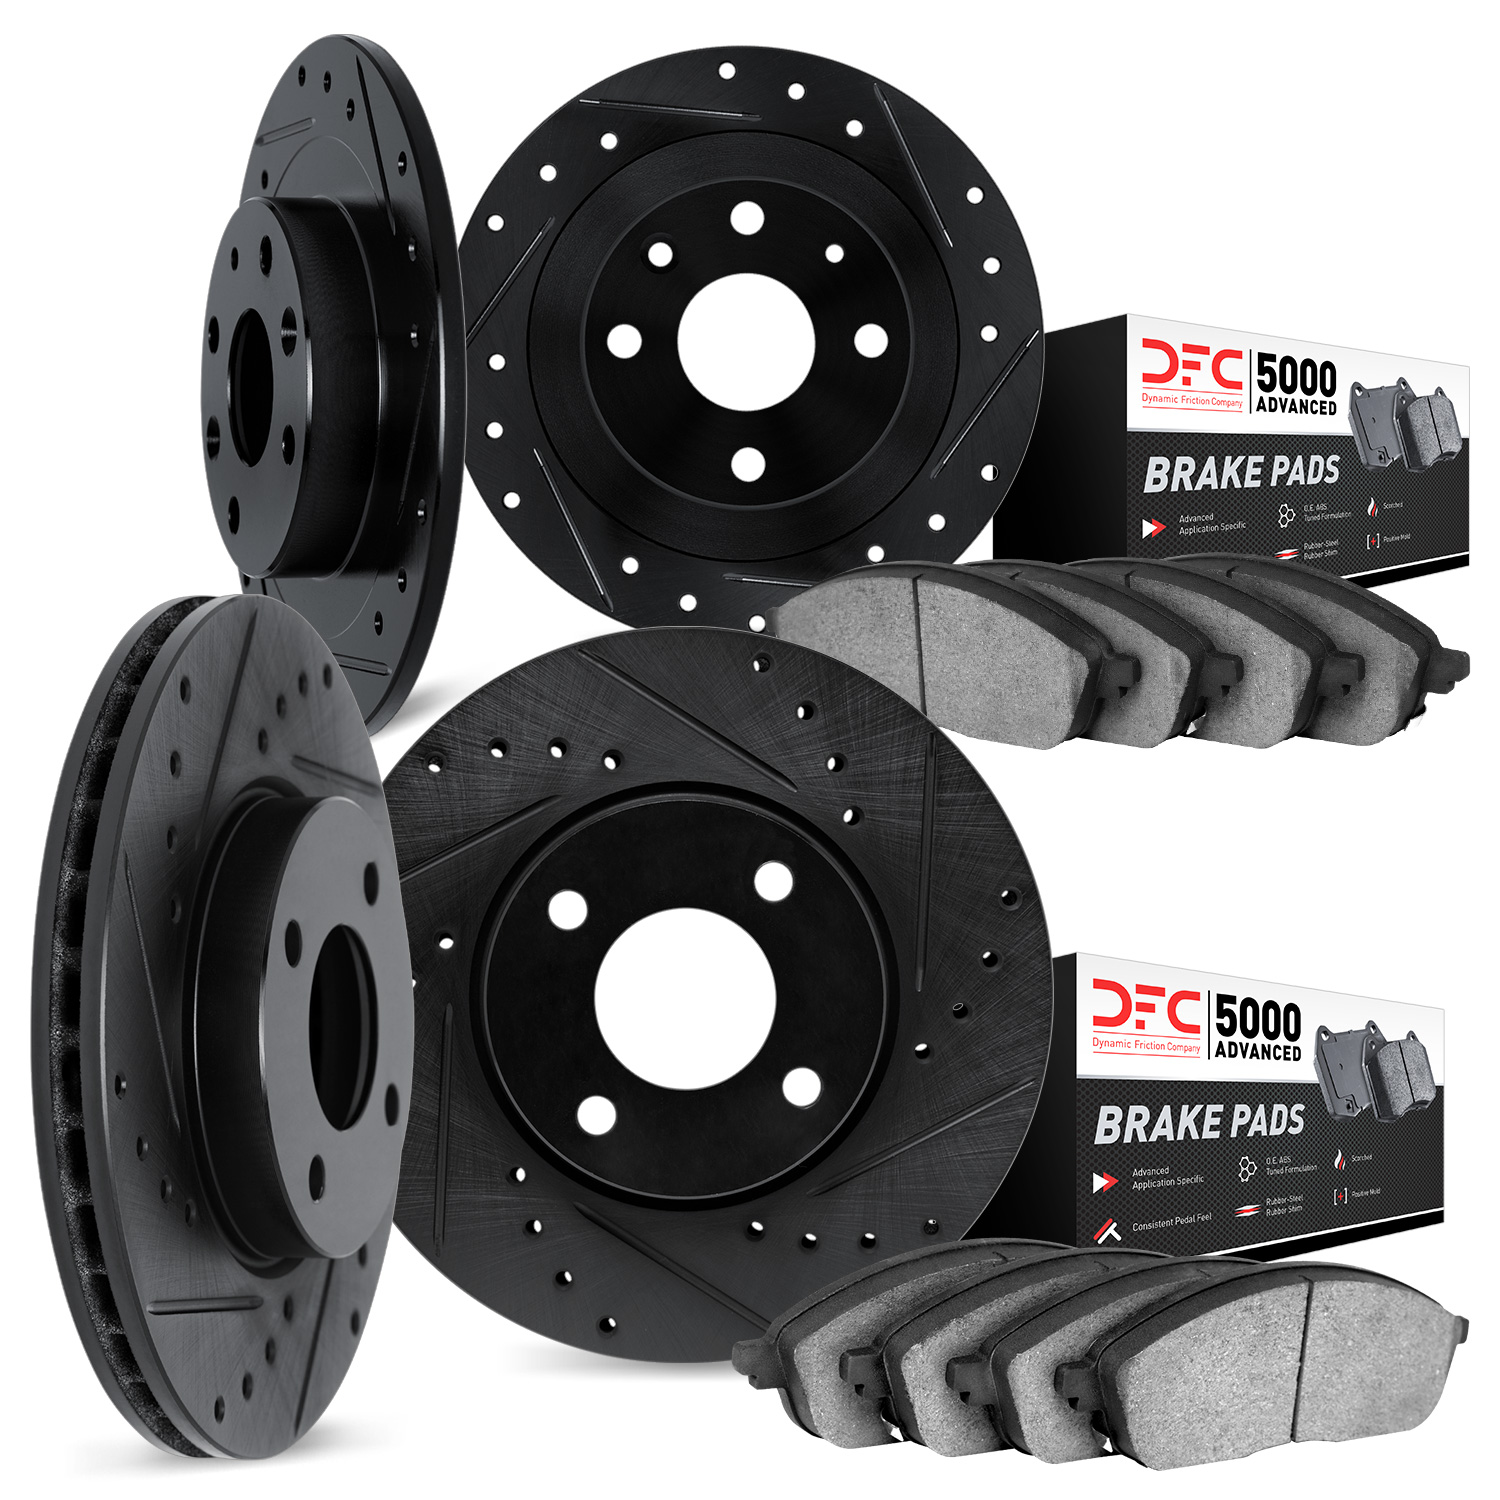 8504-67093 Drilled/Slotted Brake Rotors w/5000 Advanced Brake Pads Kit [Black], 1996-2000 Infiniti/Nissan, Position: Front and R